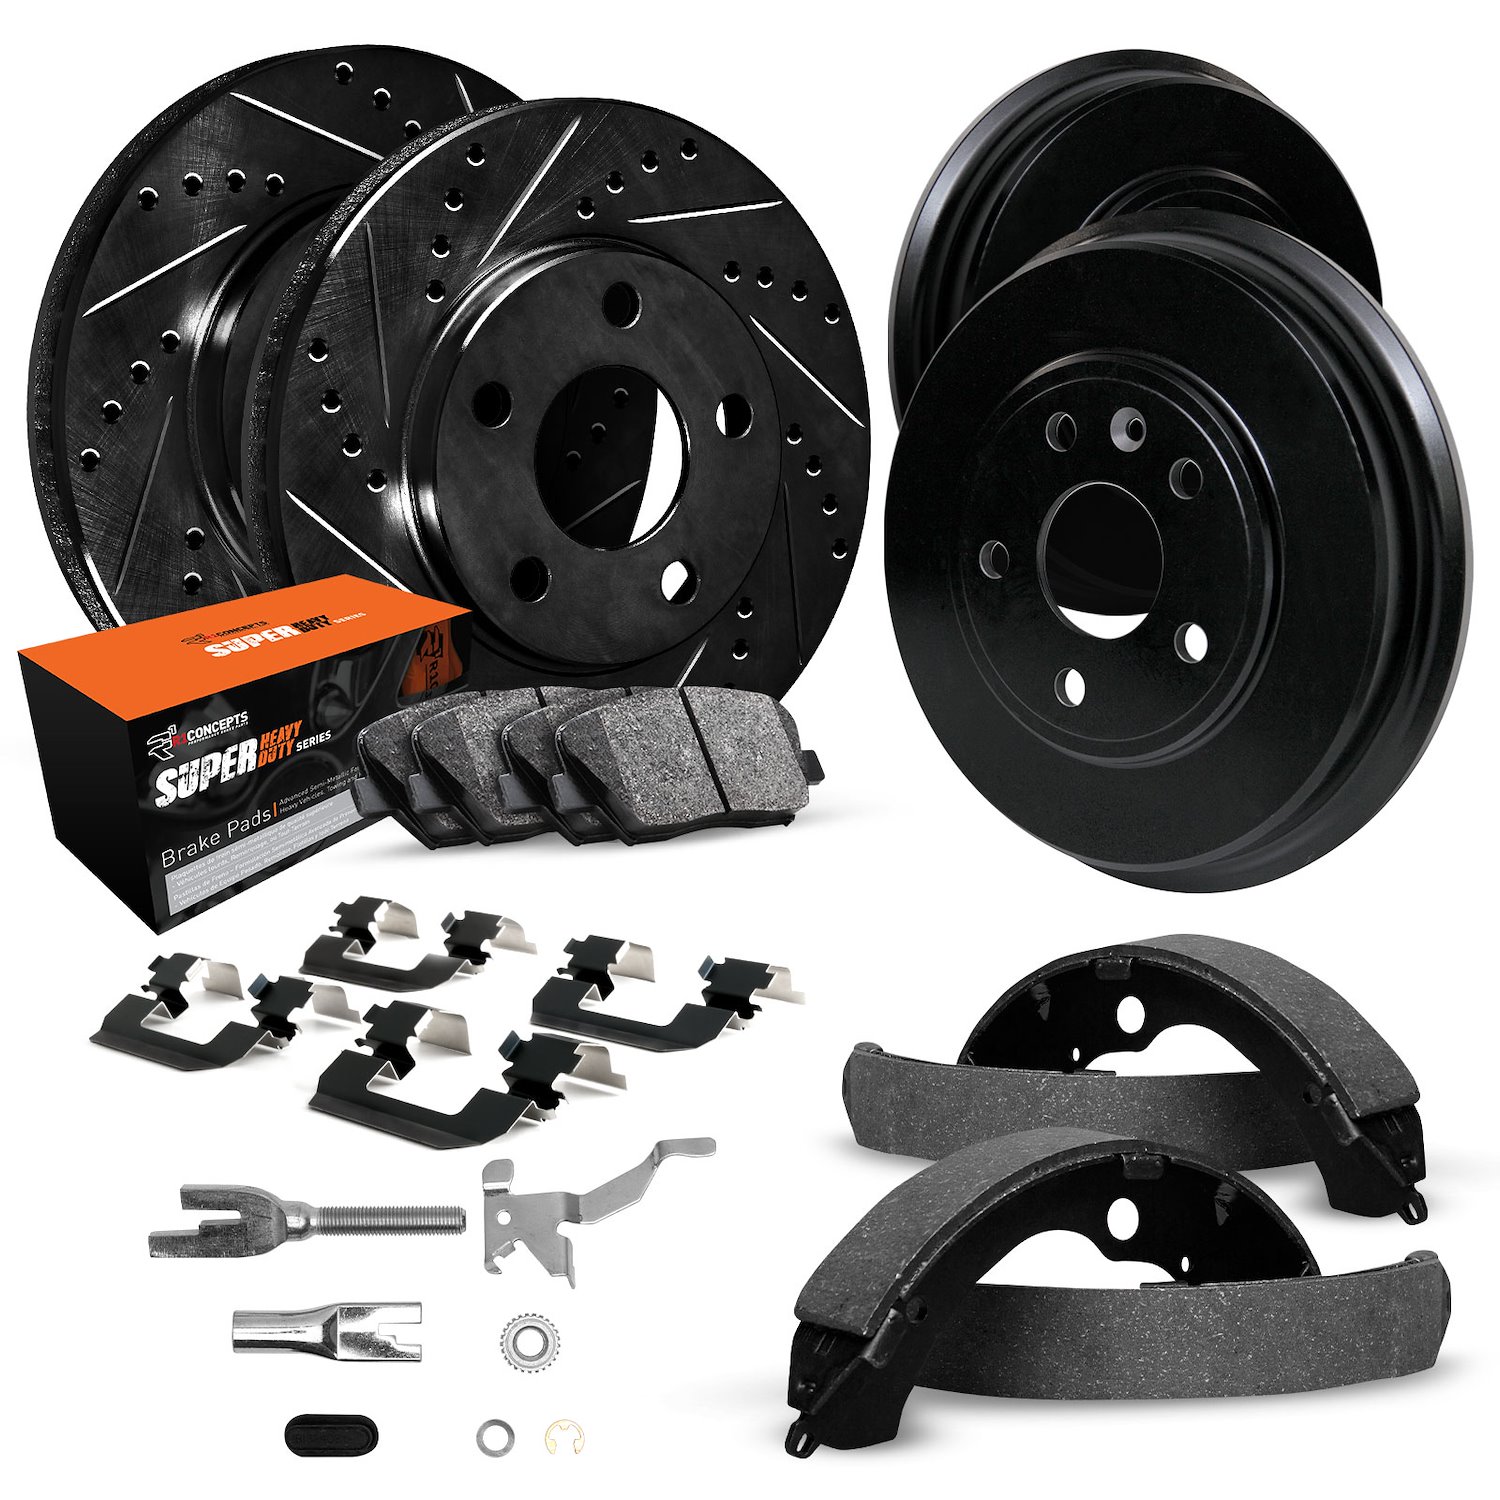 E-Line Drilled/Slotted Black Rotor & Drum Set w/Super-Duty Pads, Shoes, Hardware/Adjusters, 1995-1996 Ford/Lincoln/Mercury/Mazda